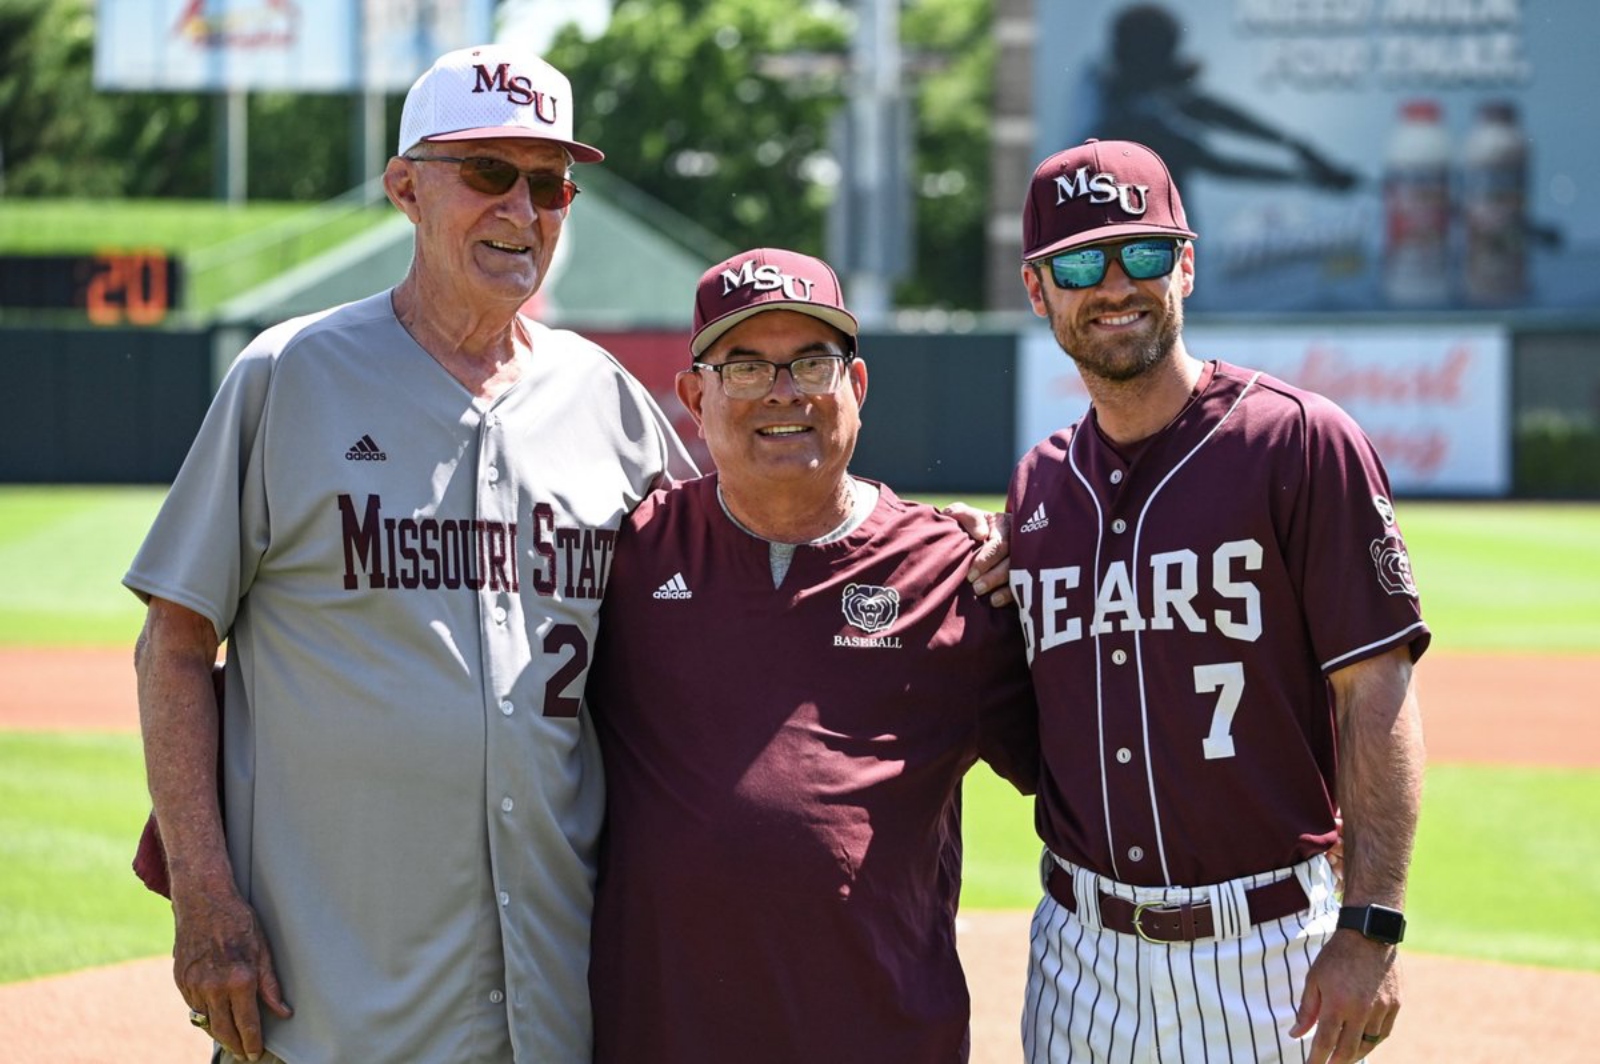 Joey Hawkins is just the third head coach in the history of Missouri State’s baseball program, following Bill Rowe and Keith Guttin. He was officially announced as the new coach on June 4. (Photo by Jesse Scheve, Missouri State University)